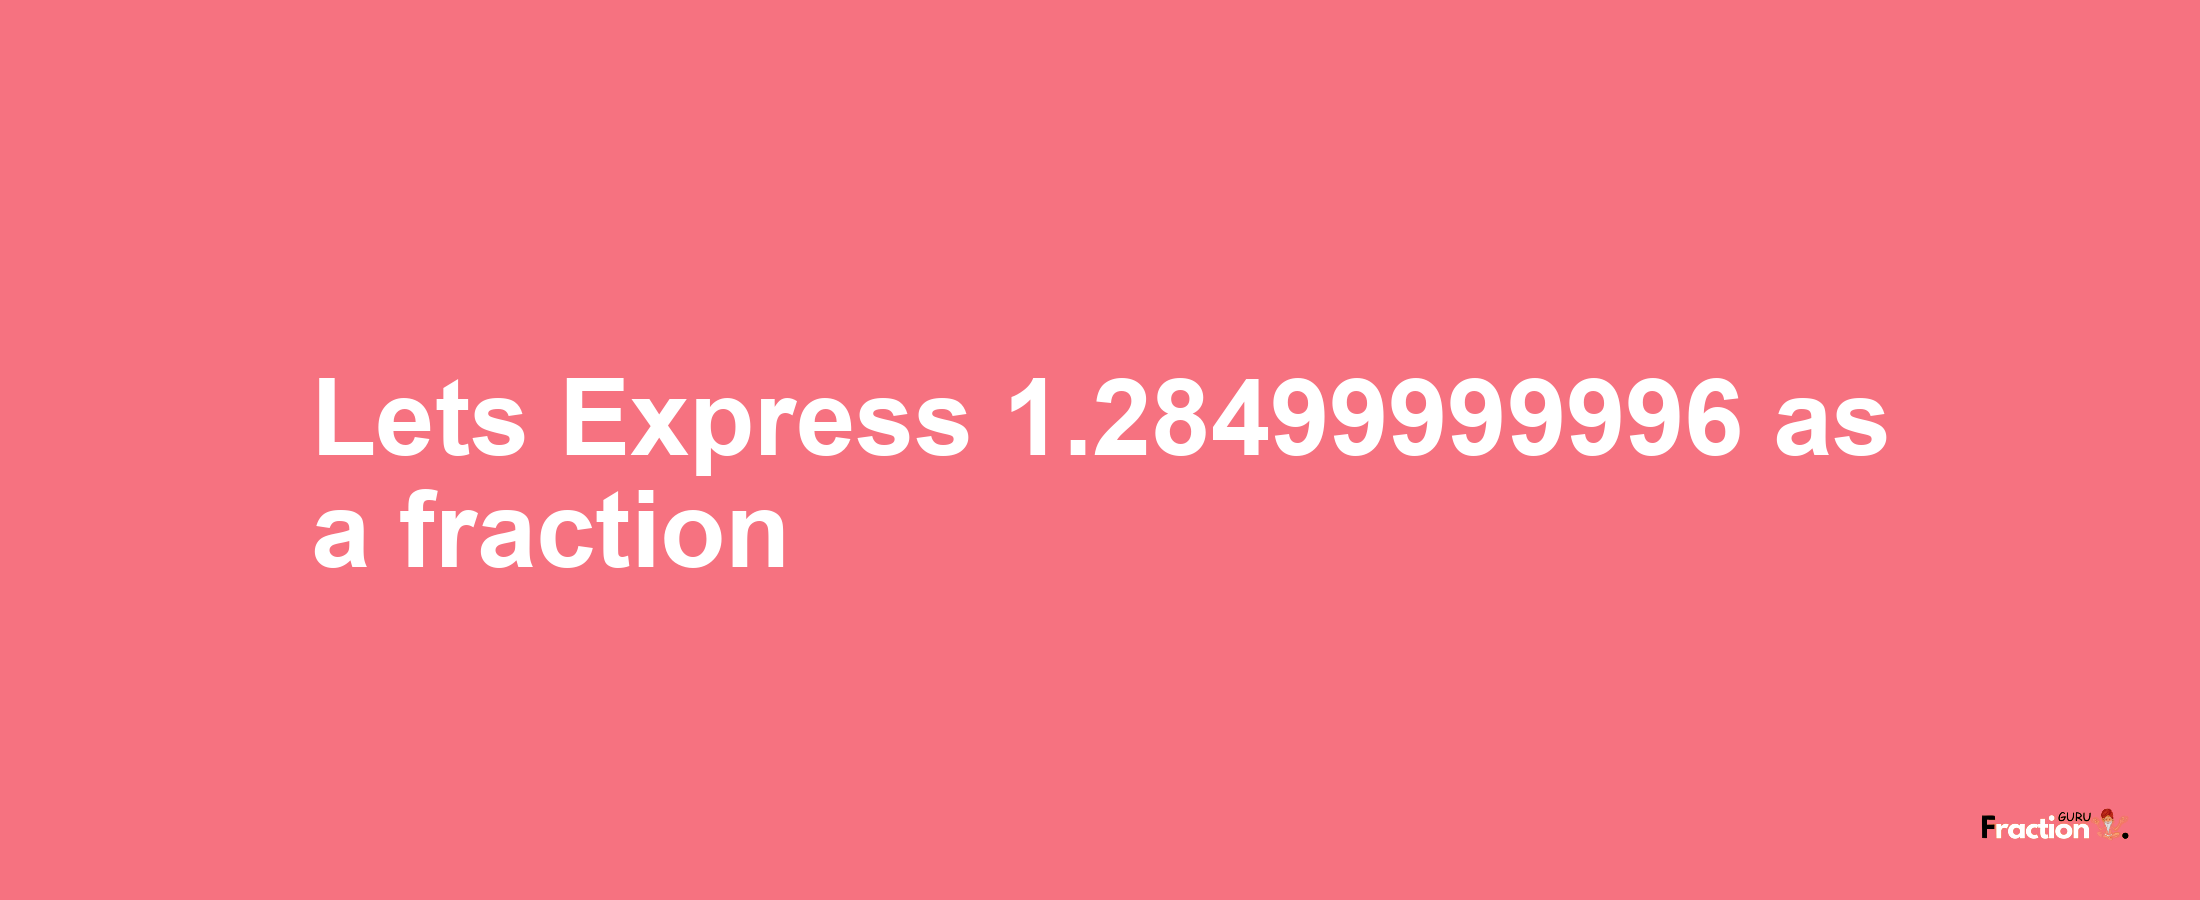 Lets Express 1.28499999996 as afraction